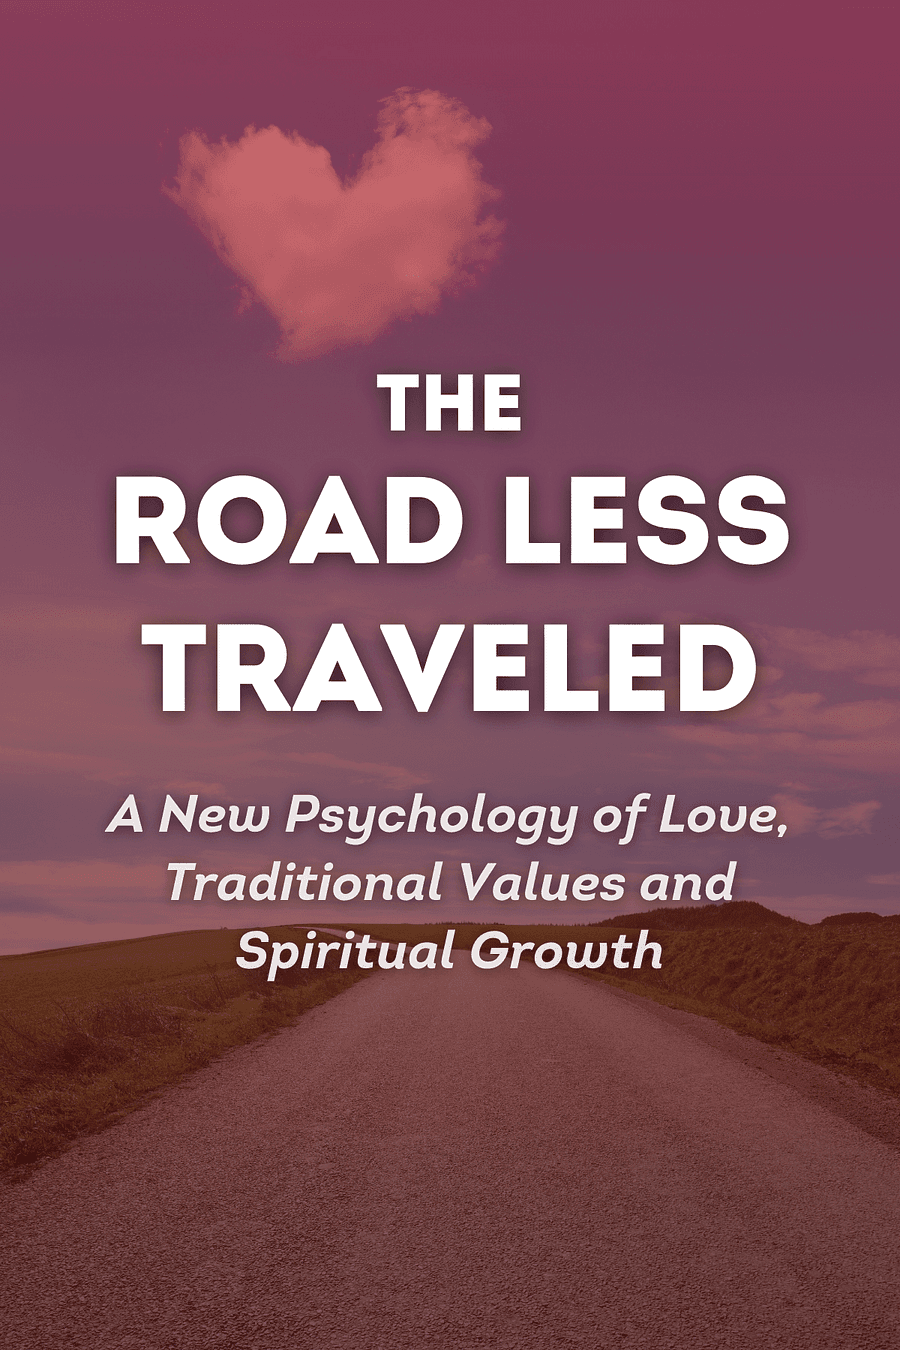 The Road Less Traveled by M. Scott Peck - Book Summary